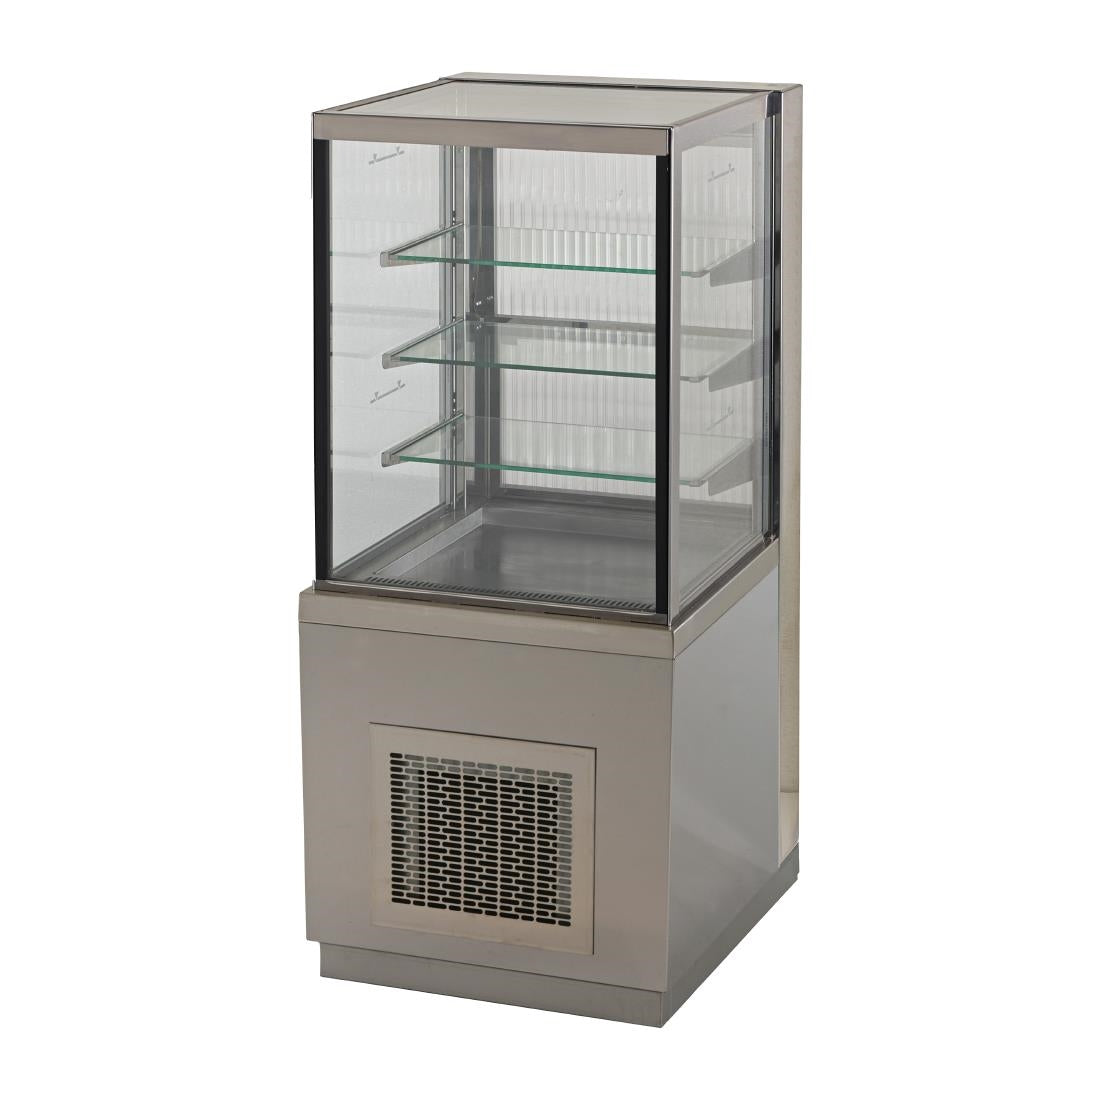 FS546 Victor Optimax SQ SMR65ECT Refrigerated Display